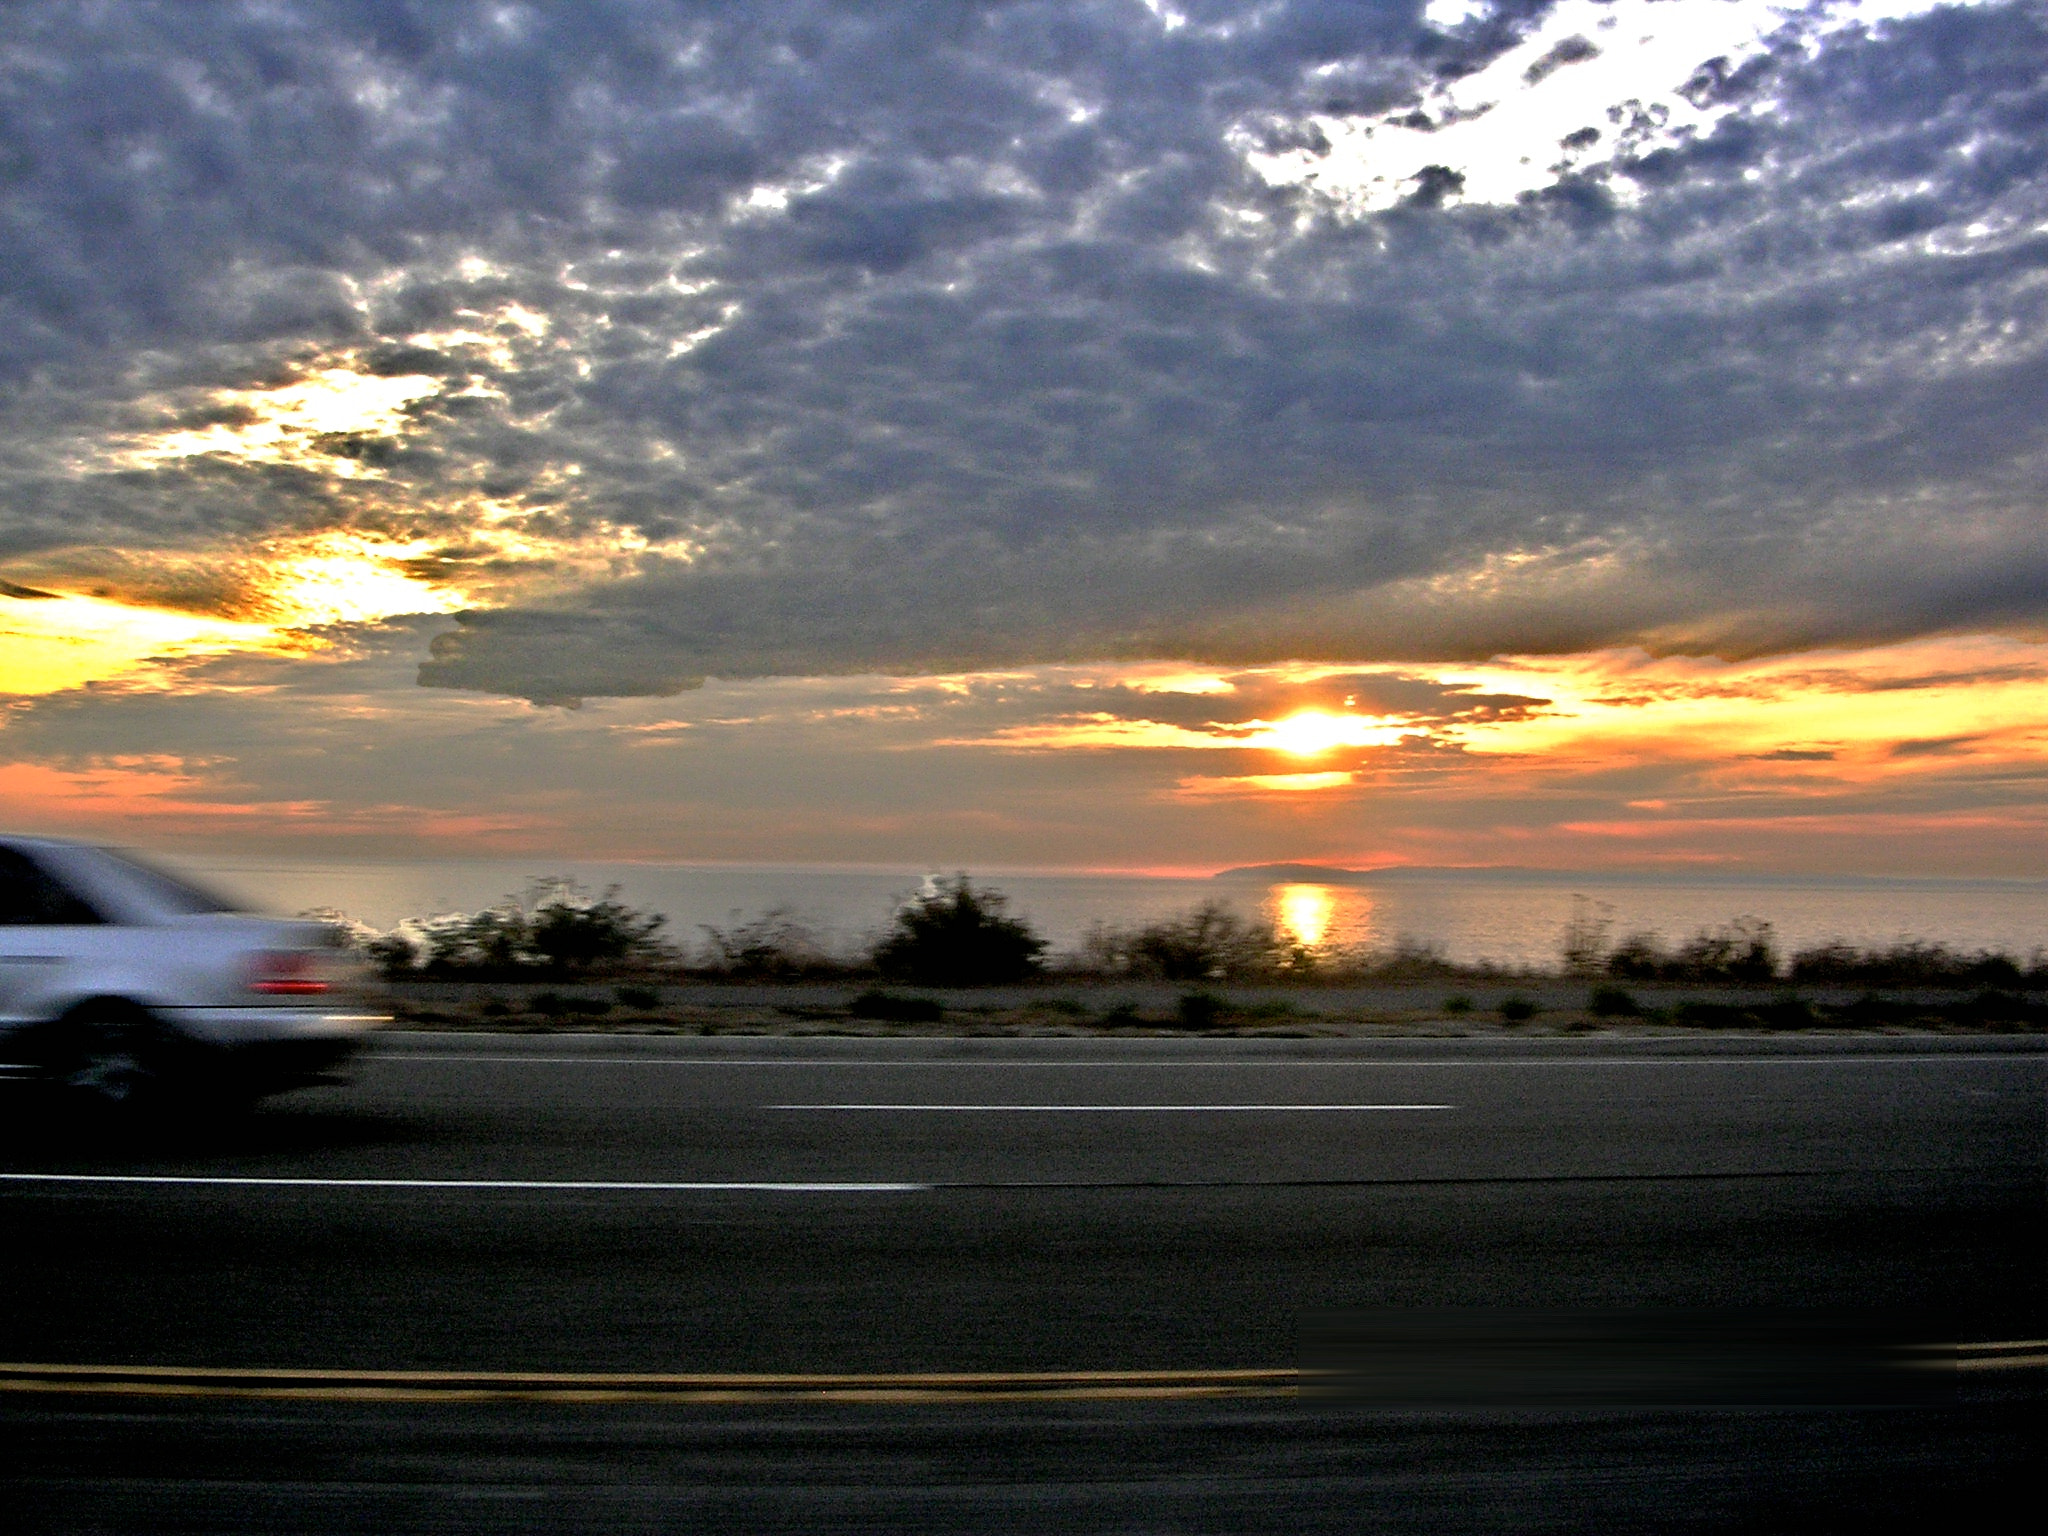 Nikon E3200 sample photo. Cars on the road, eyes on the sun by remzi oten photography